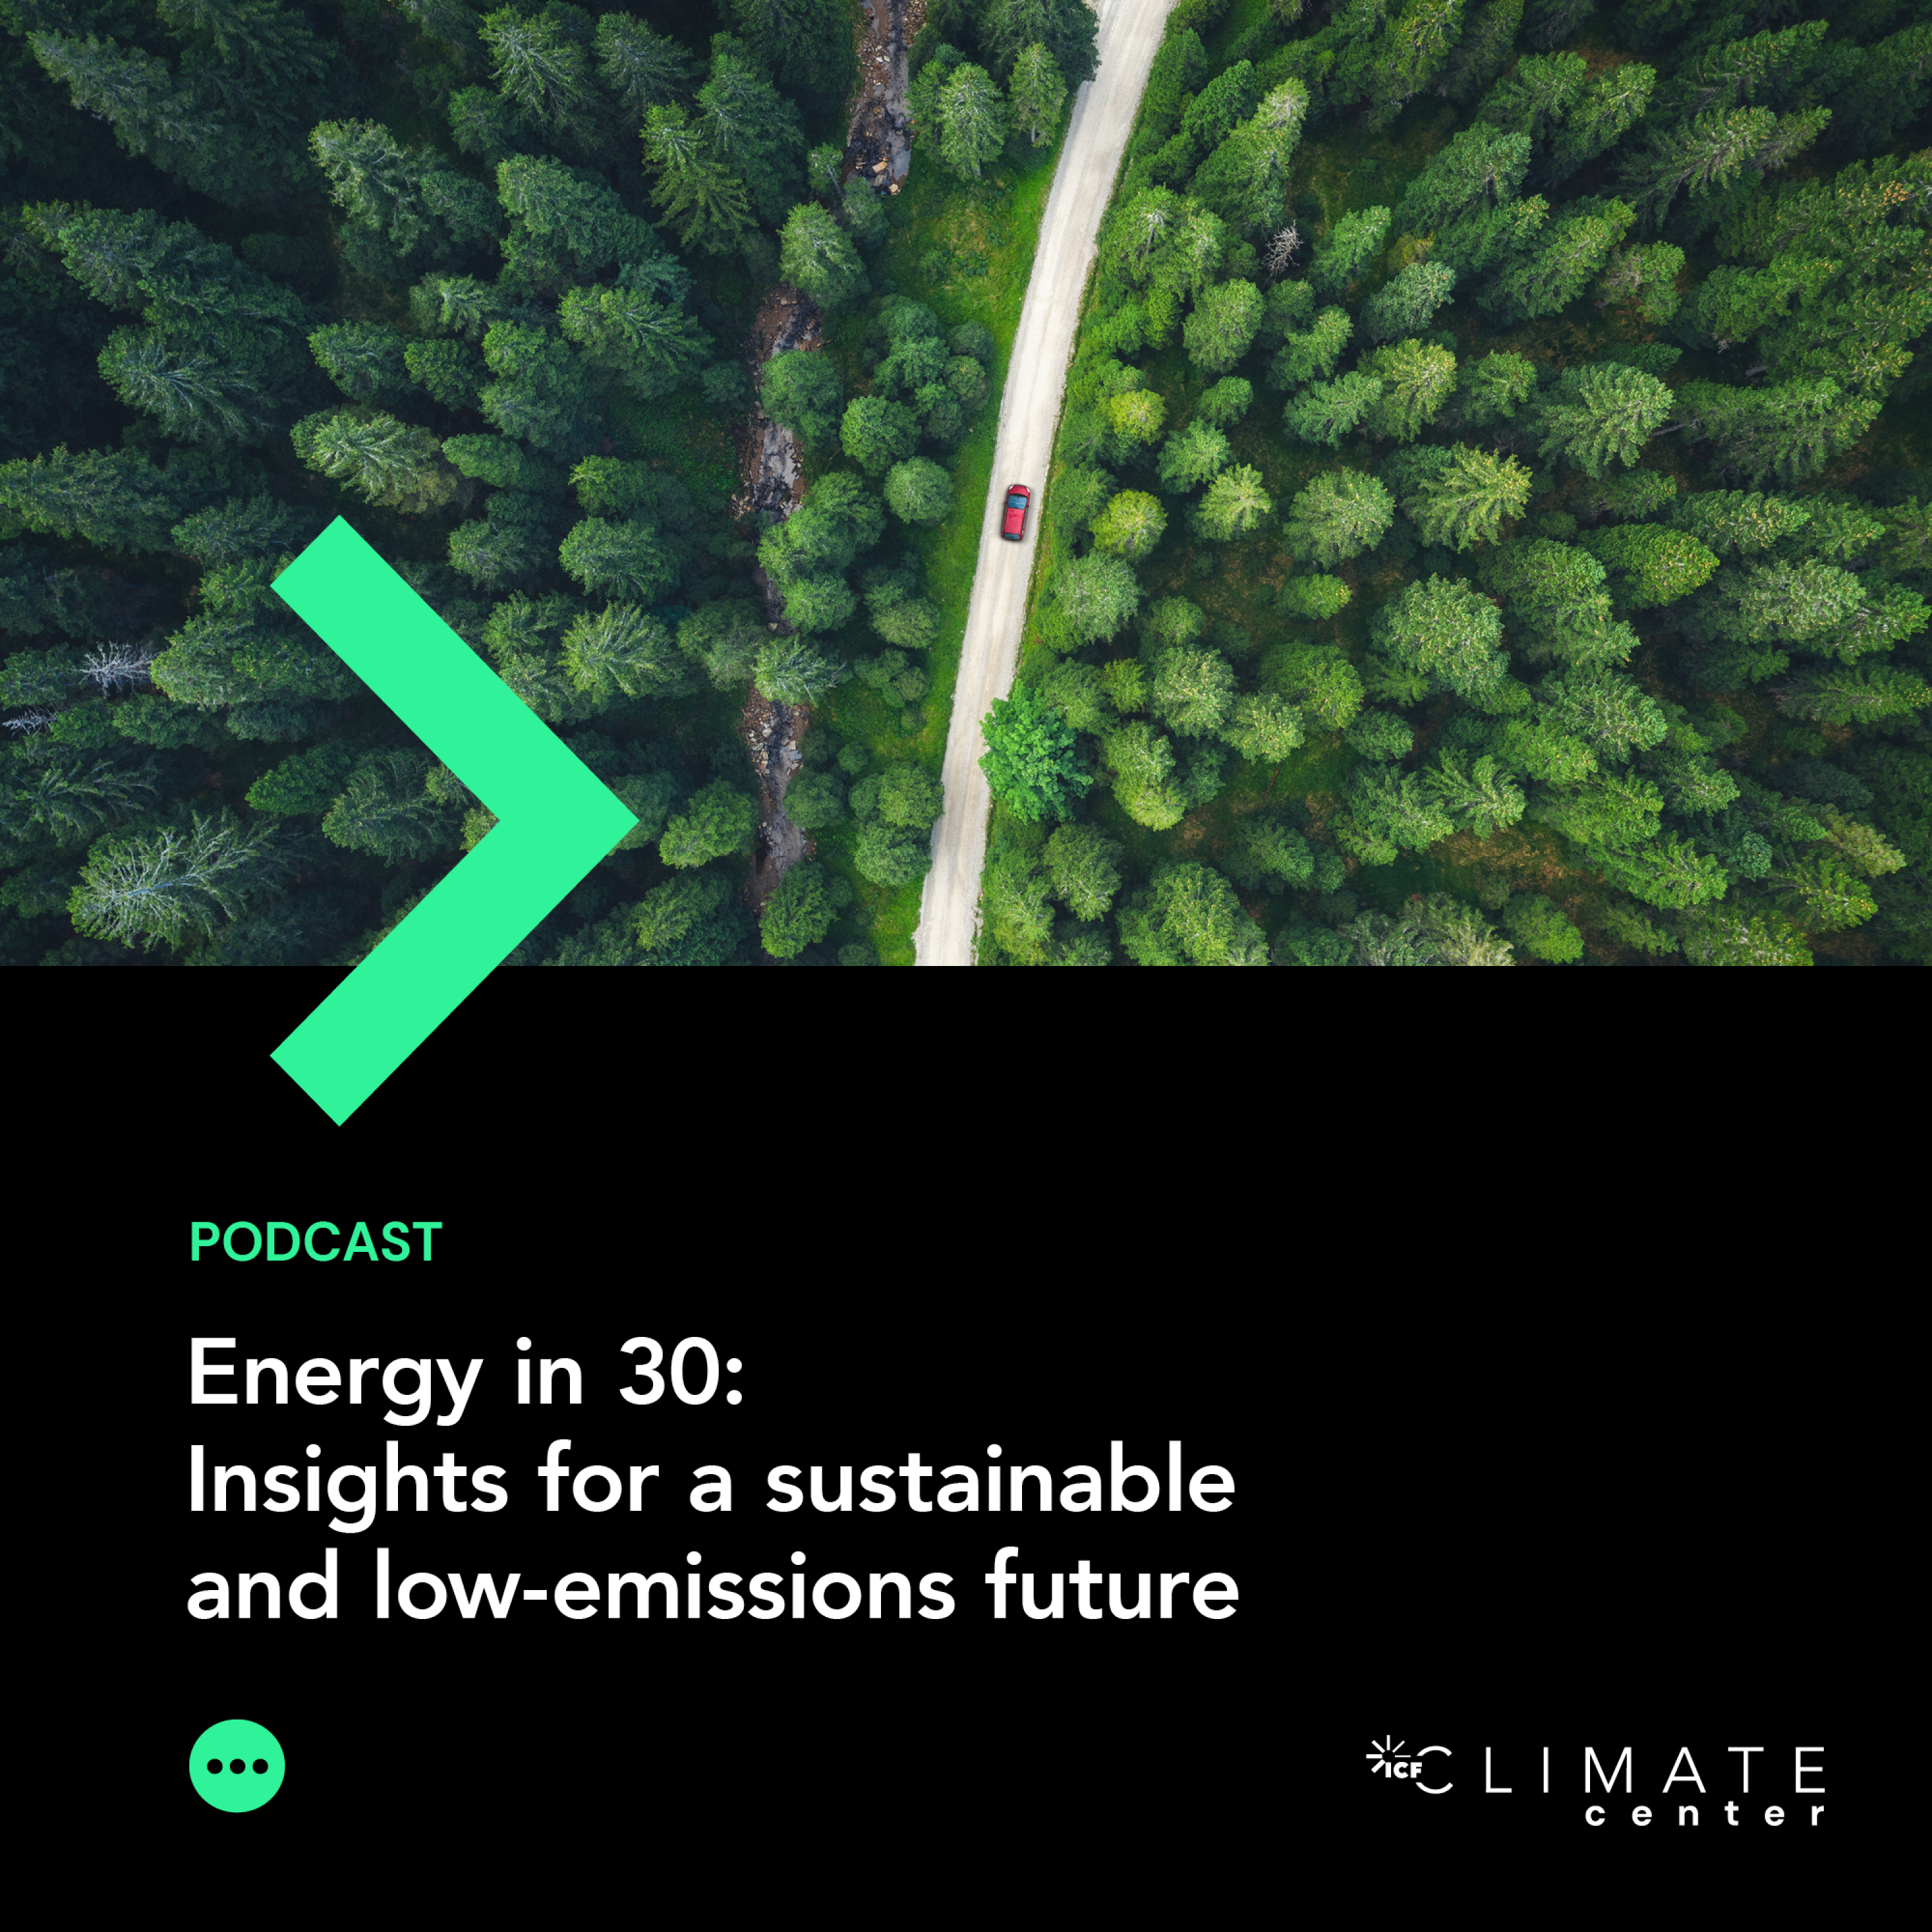 Energy in 30 #12: Insights for a sustainable and low-emissions future